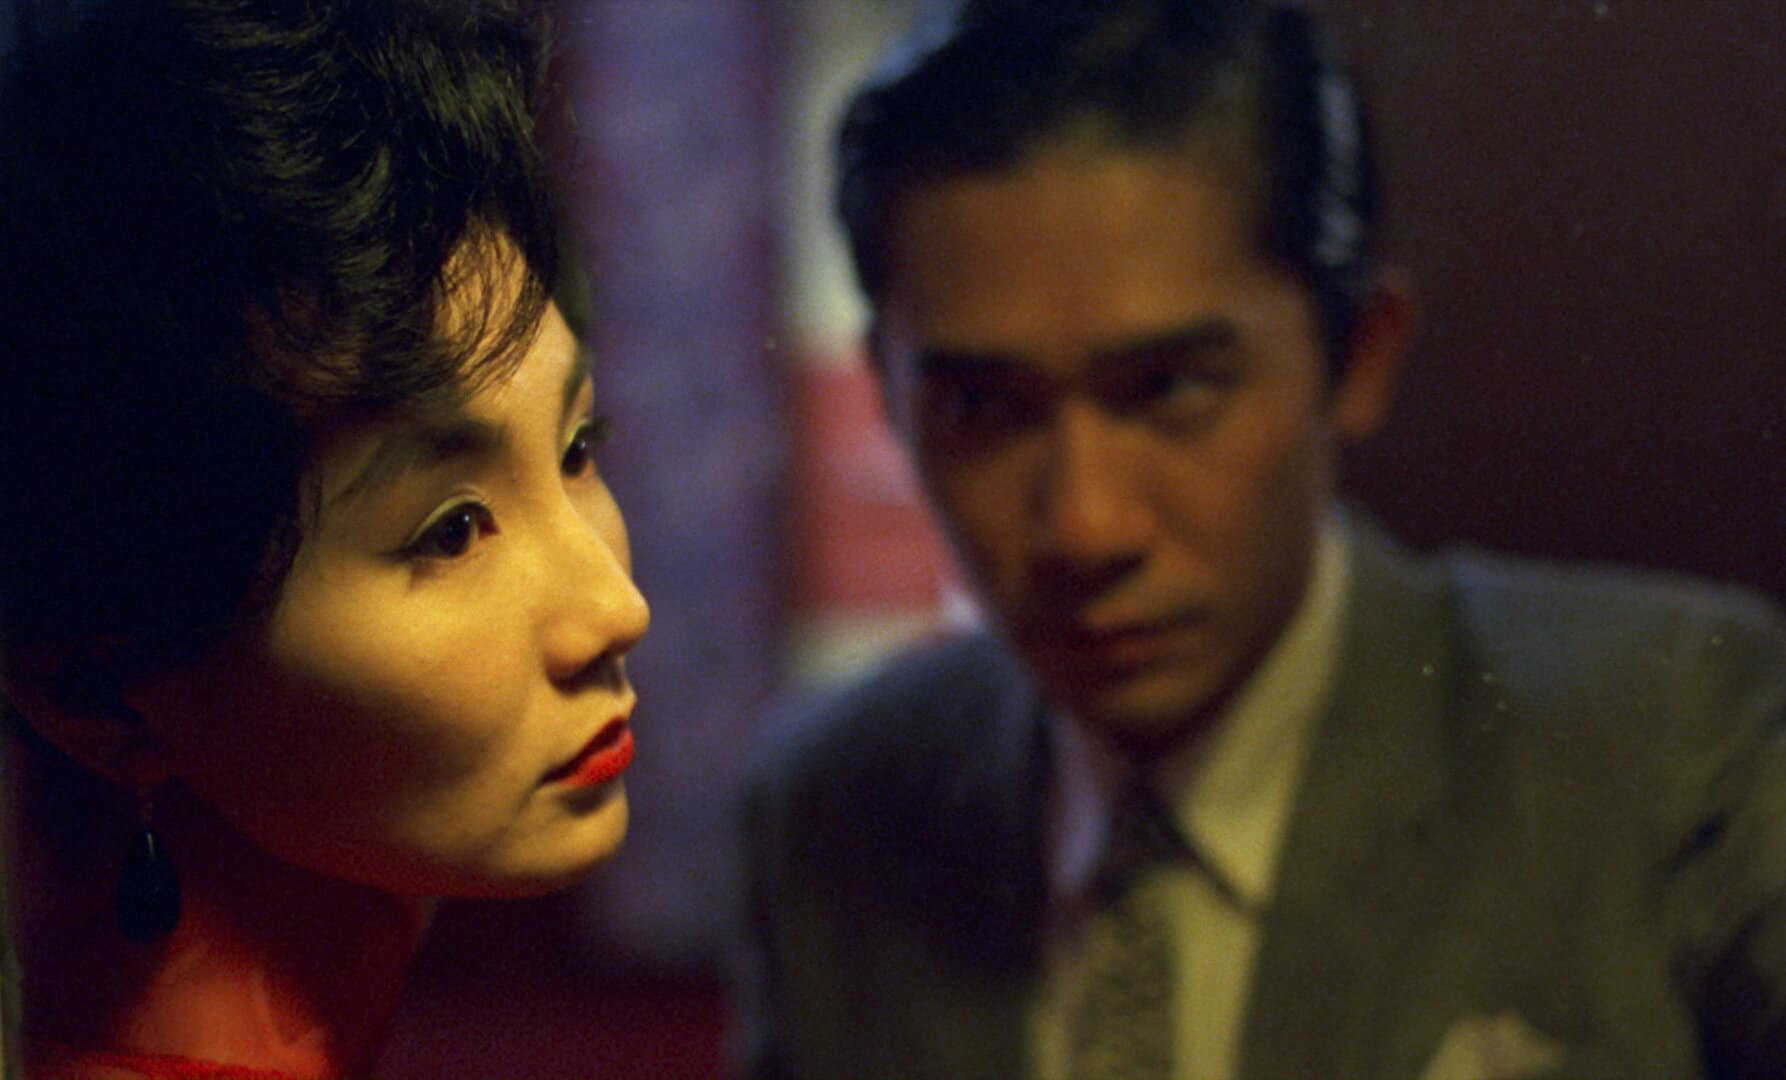 In Hong Kong, 1962: Chow Mo-Wan (Tony Leung Chiu Wai) and Su Li-Zhen (Maggie Cheung Man Yuk) meet on a city street at night in 'In the Mood for Love.' Press film still courtesy of Images Cinema